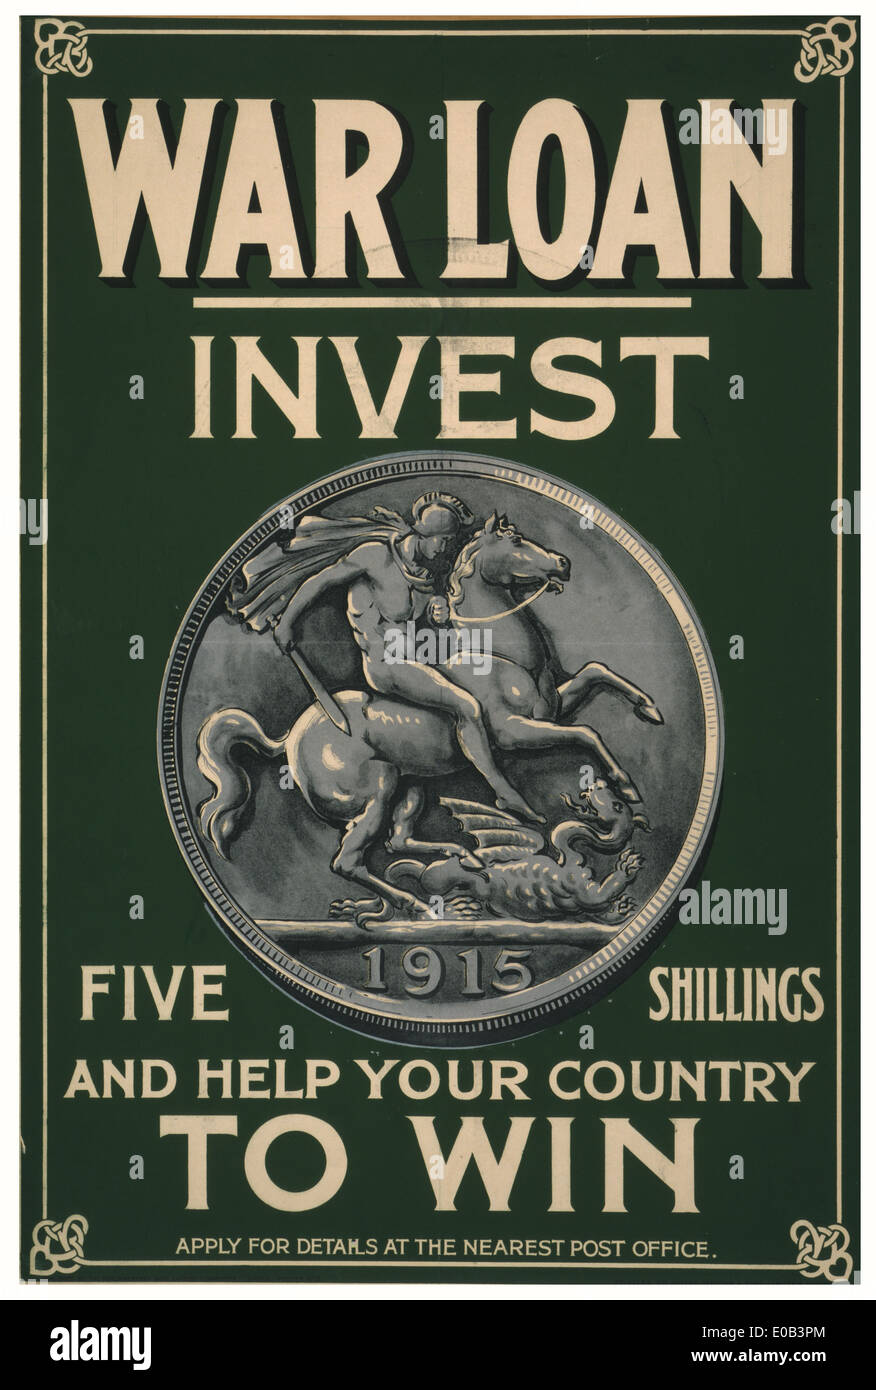 War loan. Invest five shillings and help your country to win - 1915 Stock Photo